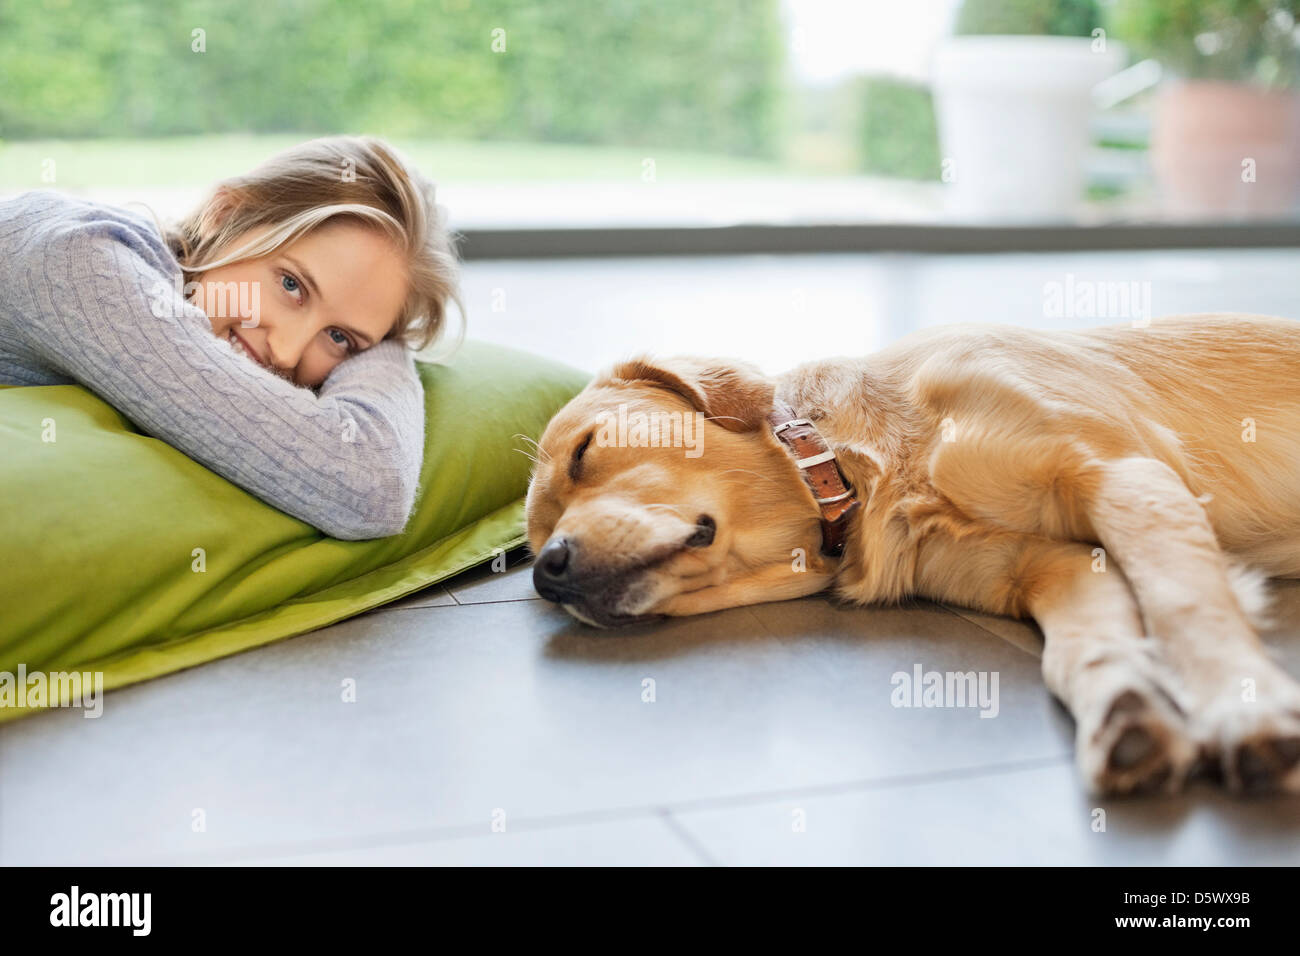 Smiling woman relaxing with dog on floor Stock Photo